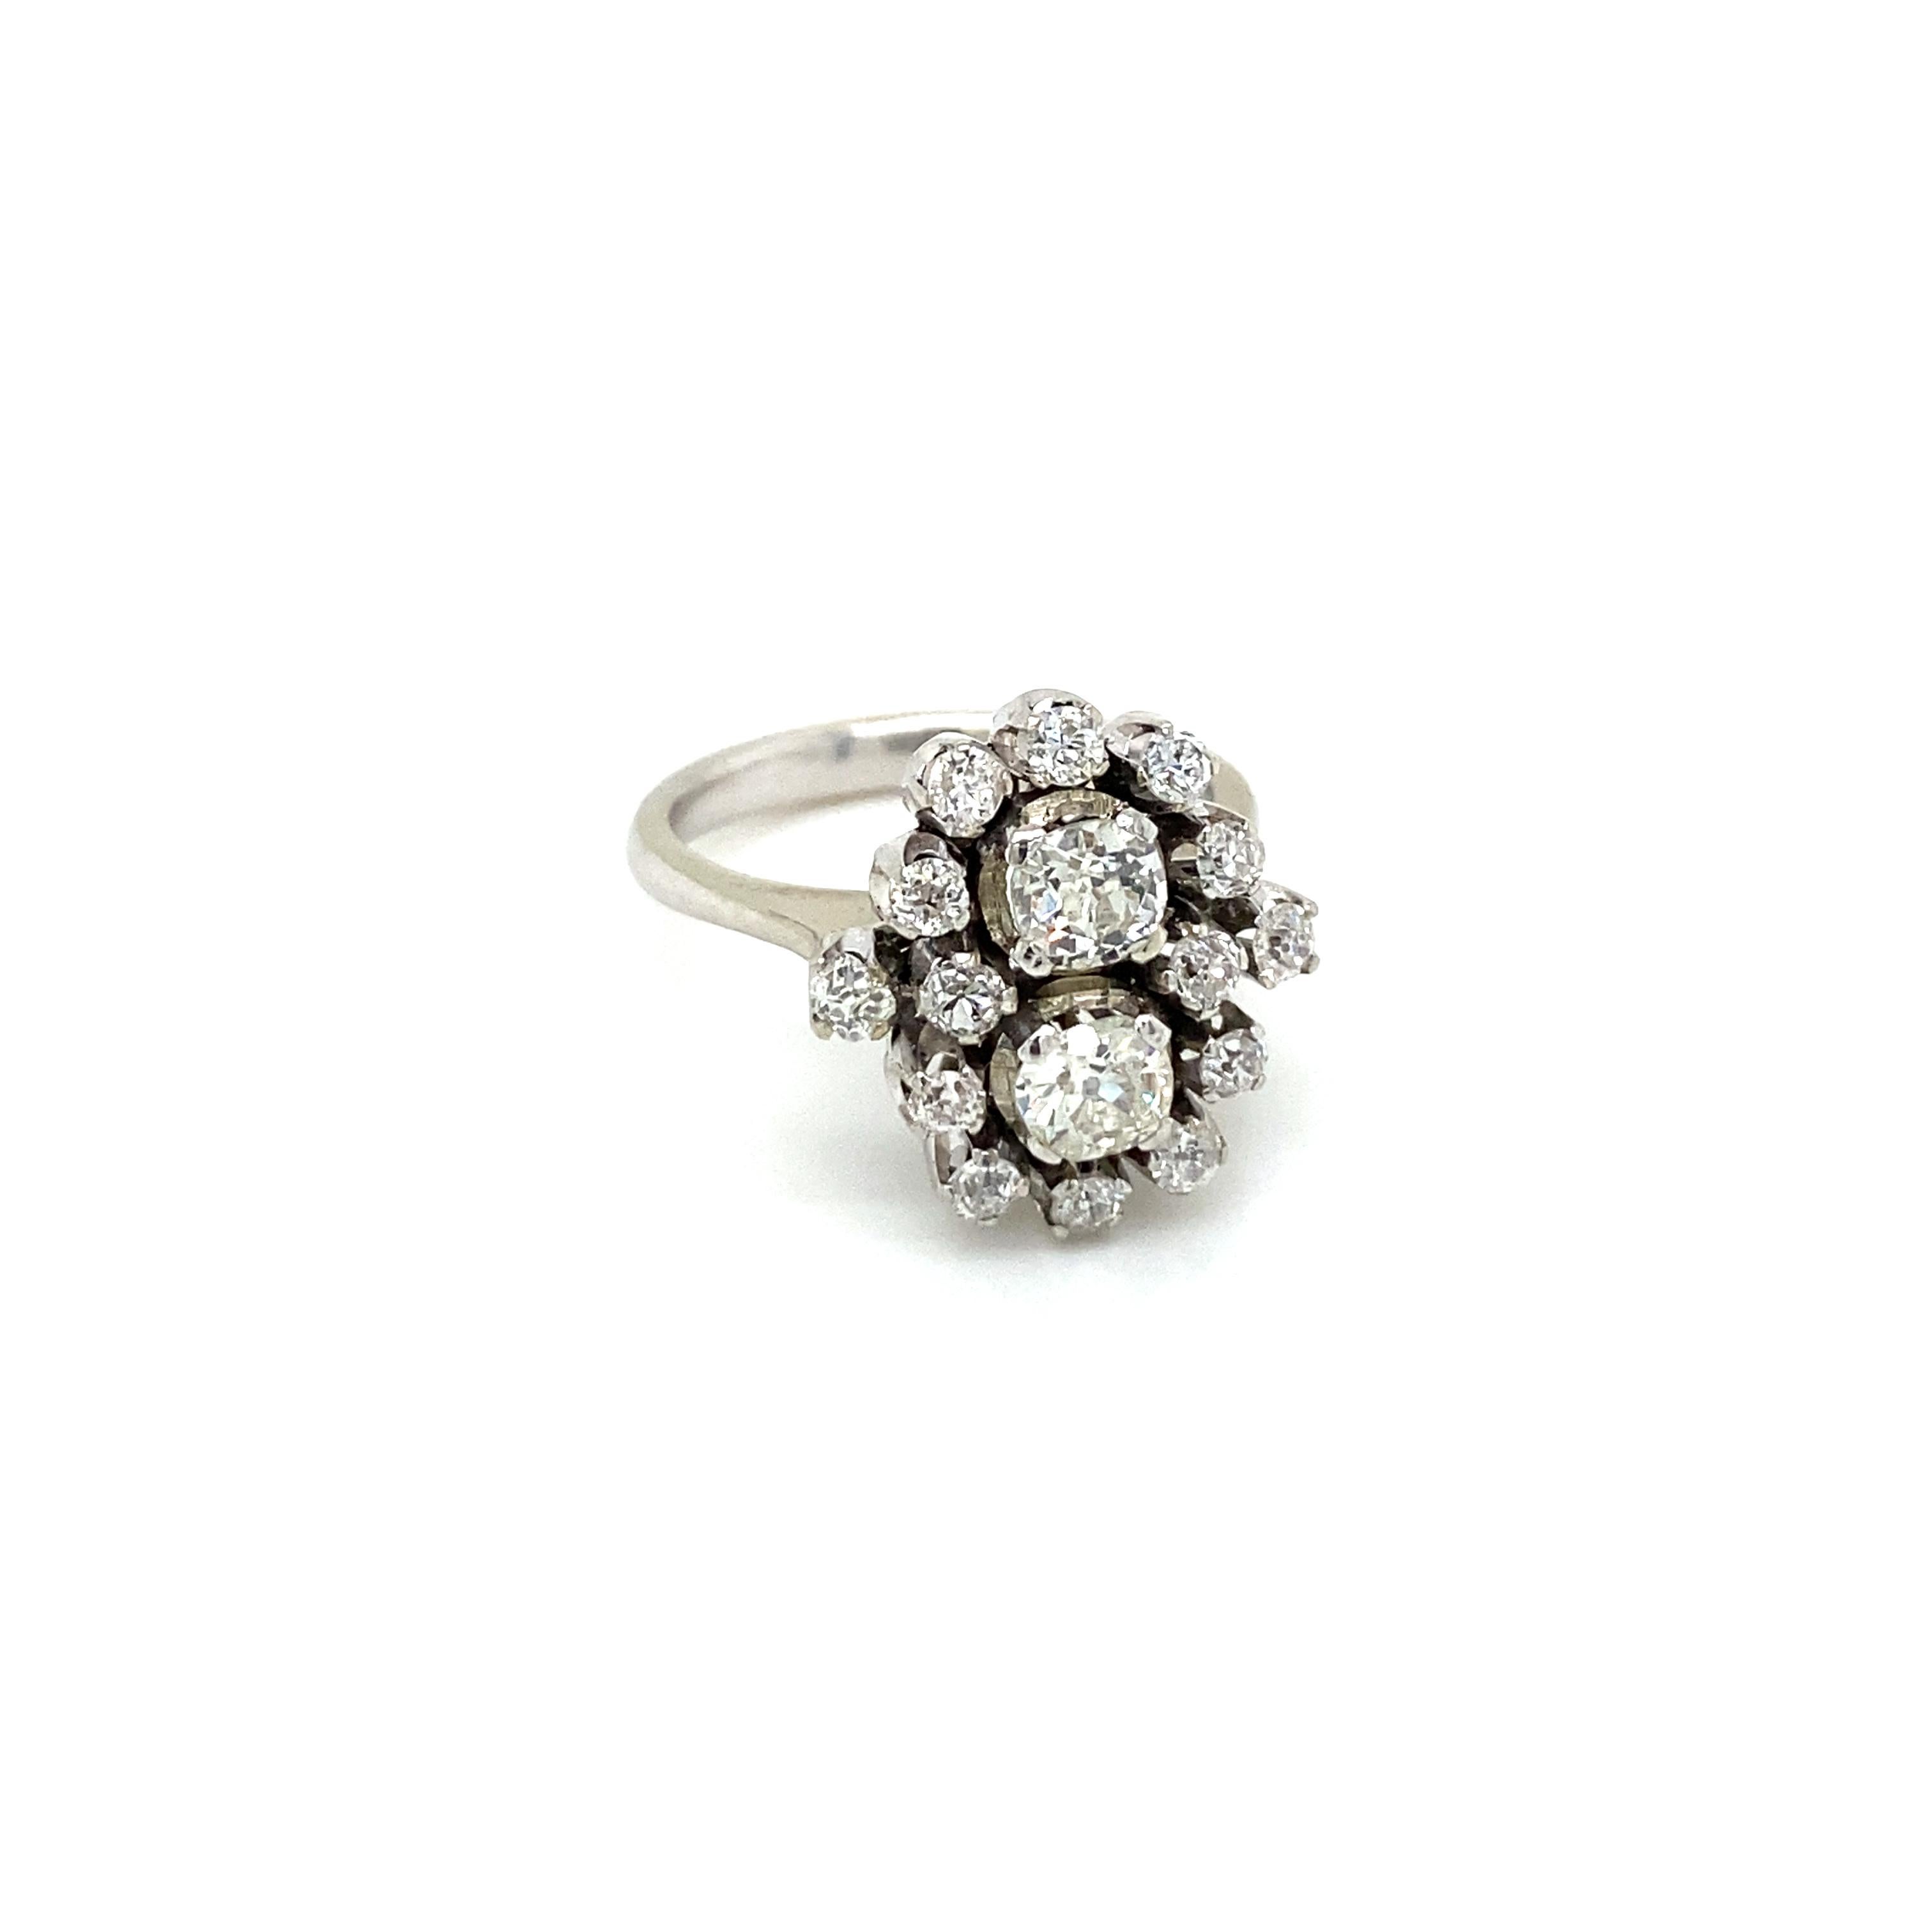 An exquisite example of Retro jewel. This ring is hand-crafted in 18k white gold, authentic from 1950', featuring in the center two large and sparkling Old mine-cut Diamonds weighing 1 carat together, graded I color Vs2 clarity, and framed in a